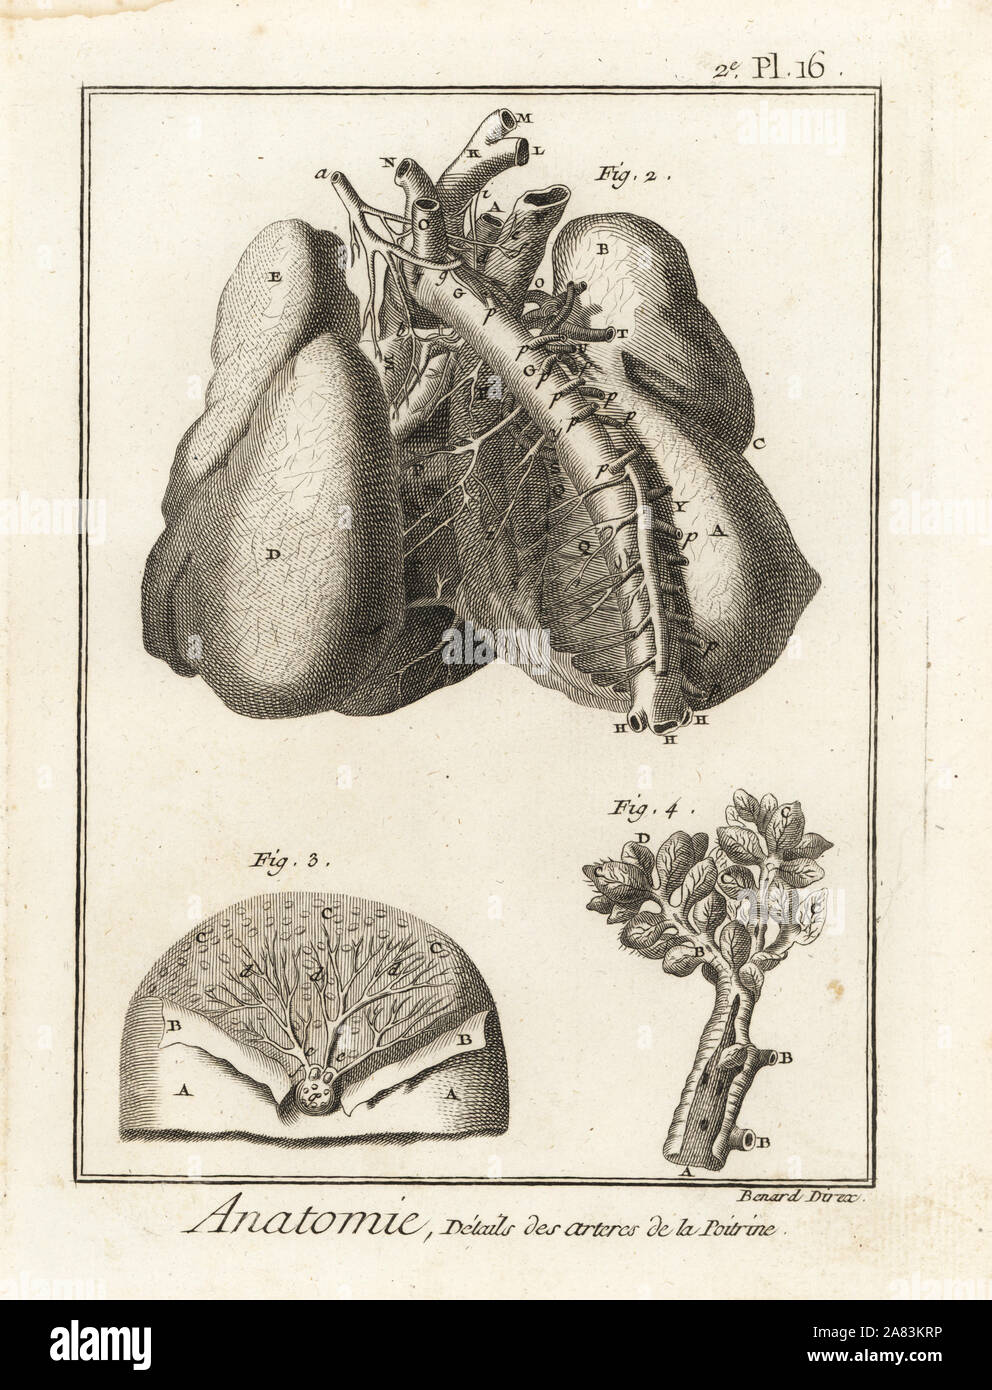 Arteries in the chest cavity to the heart and lungs. Copperplate engraving by Robert Benard after an illustration by Albrecht von Haller from Denis Diderot's Encyclopedia, Pellet, Geneva, 1779. Stock Photo